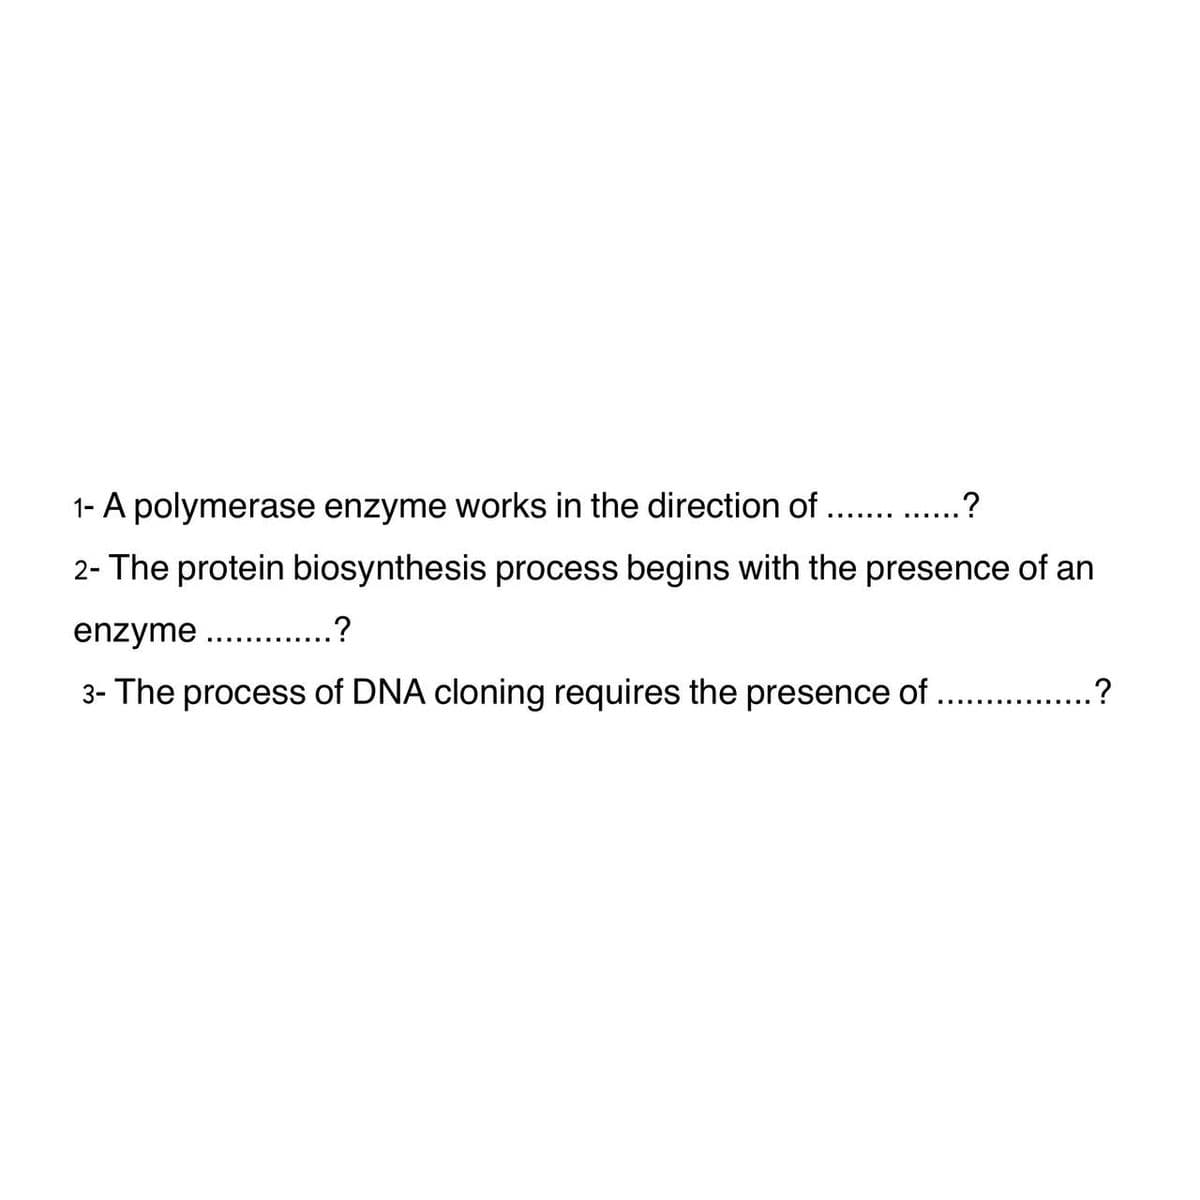 1- A polymerase enzyme works in the direction of .............?
2- The protein biosynthesis process begins with the presence of an
enzyme ...... ?
3- The process of DNA cloning requires the presence of ........?